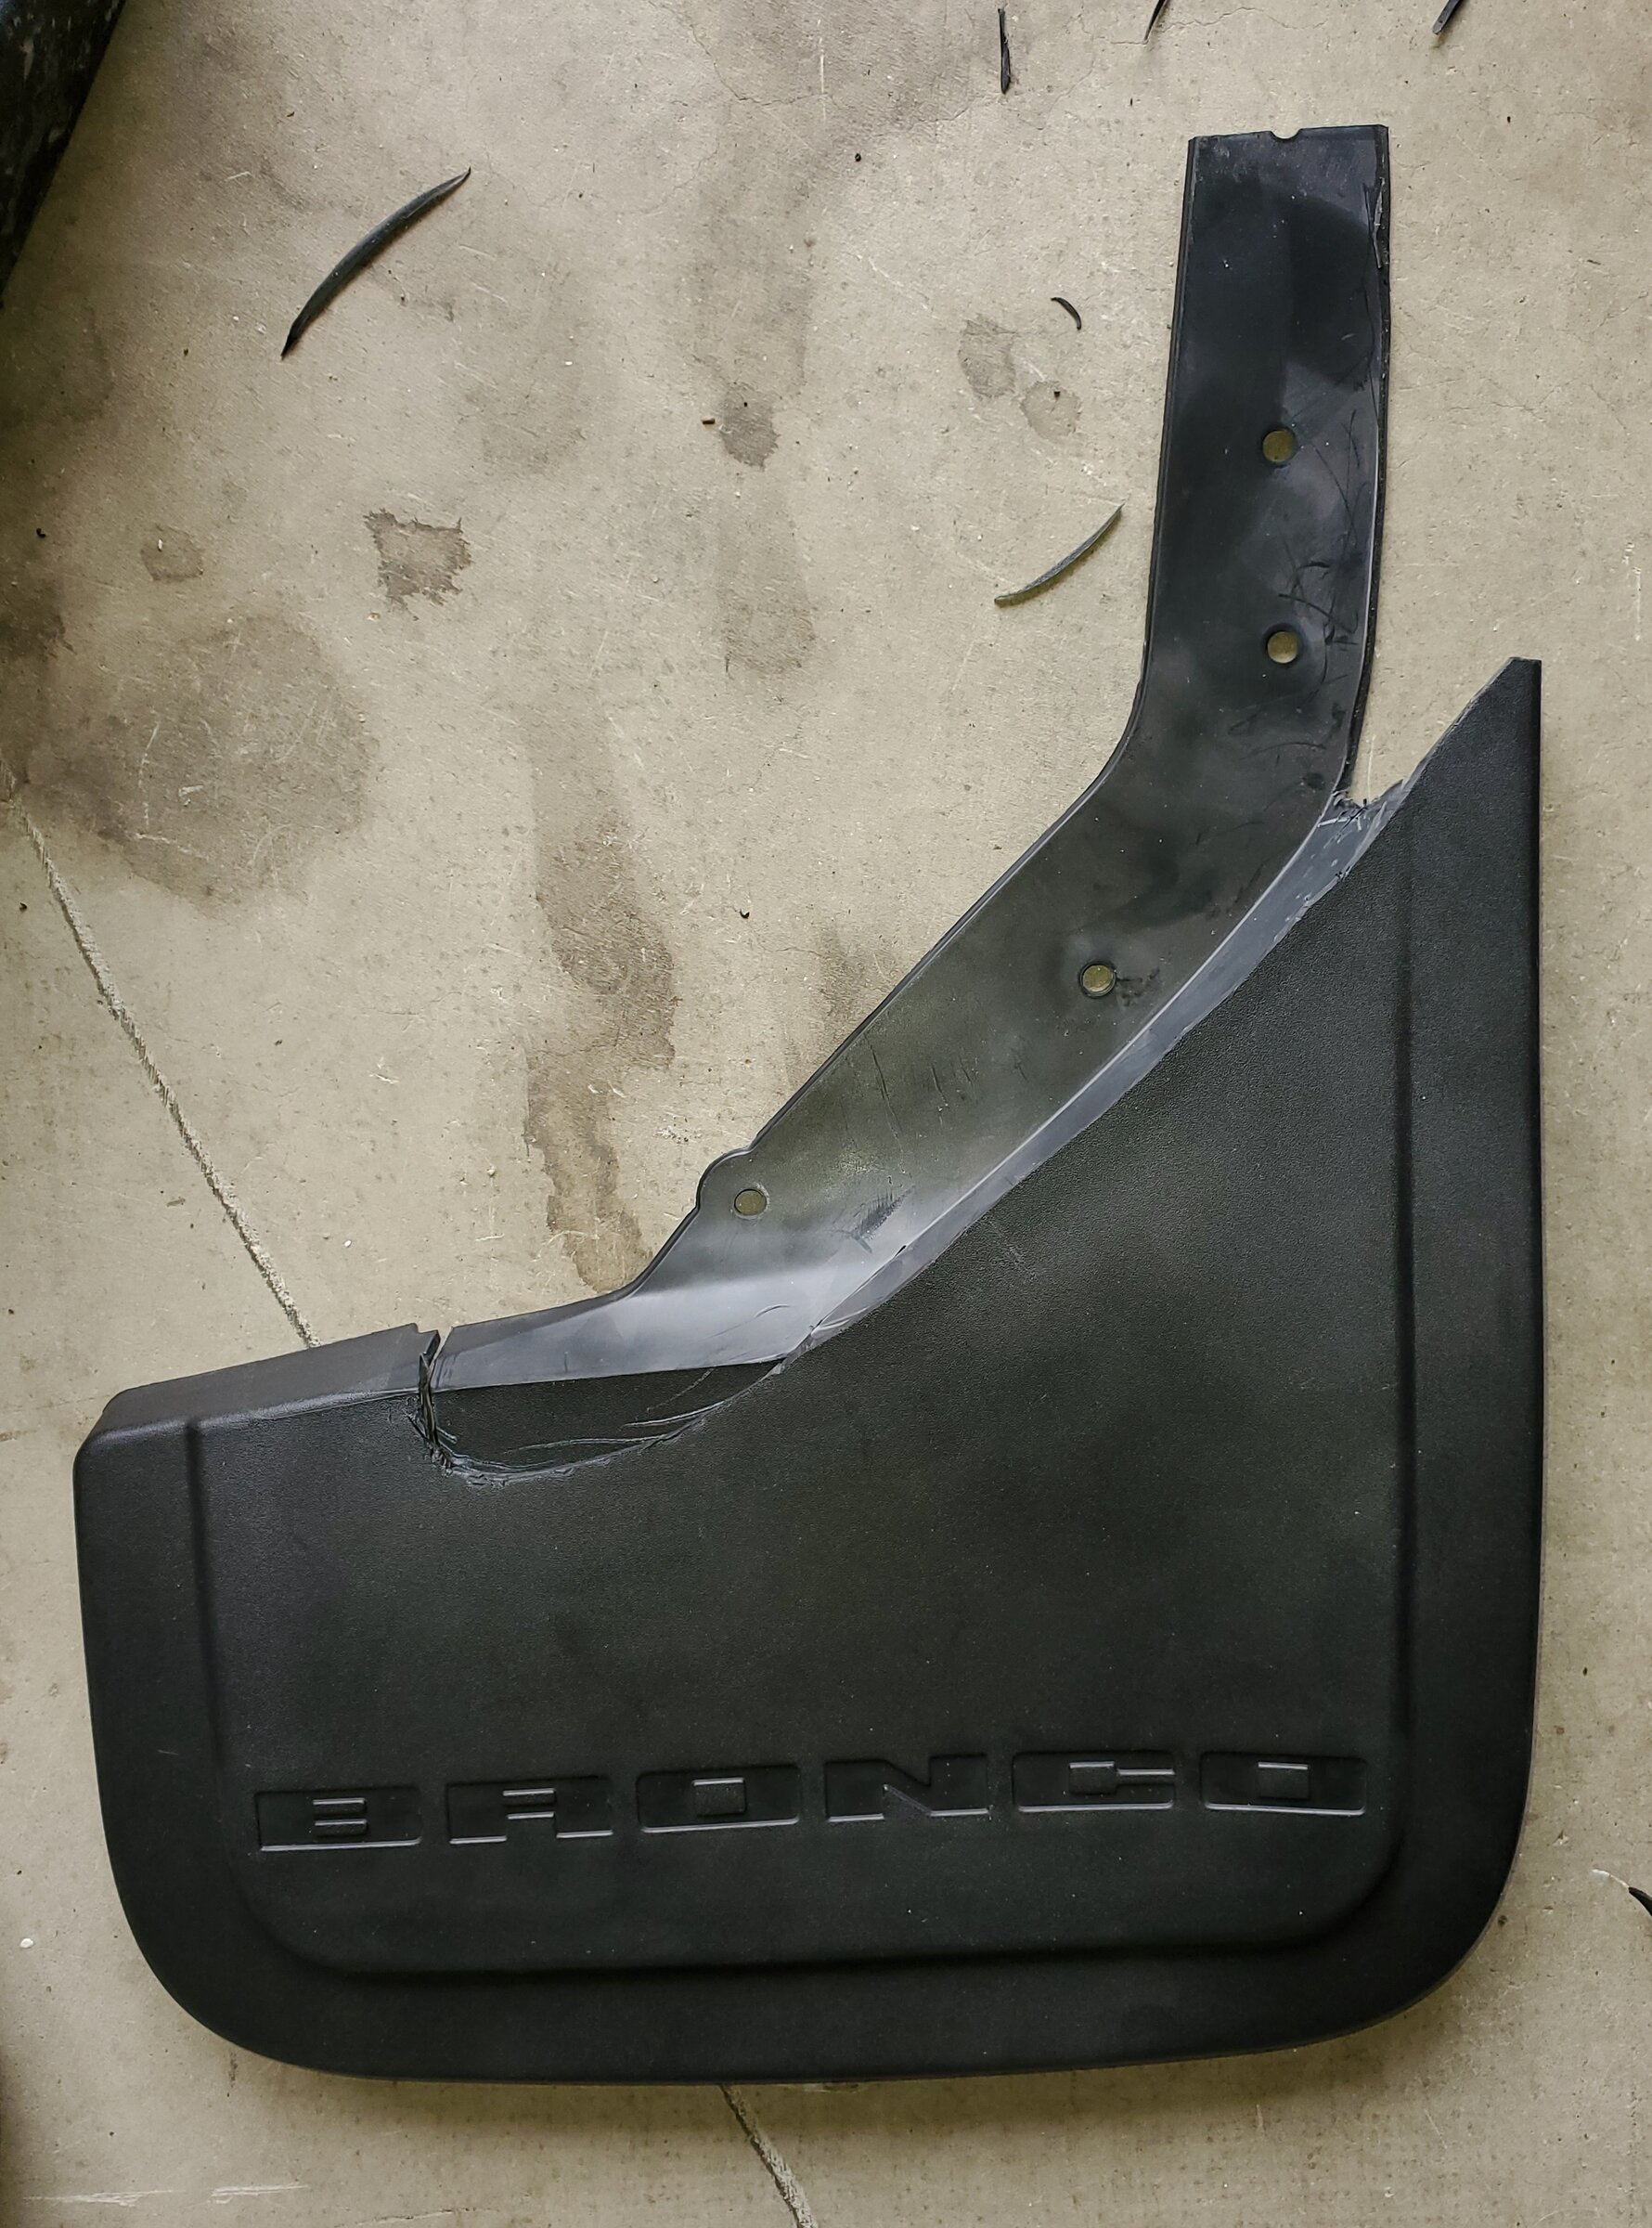 Ford Bronco Ford OEM Mud Flaps / Splash Guards trimmed to fit OBX Sasquatch with side steps 20211212_130137